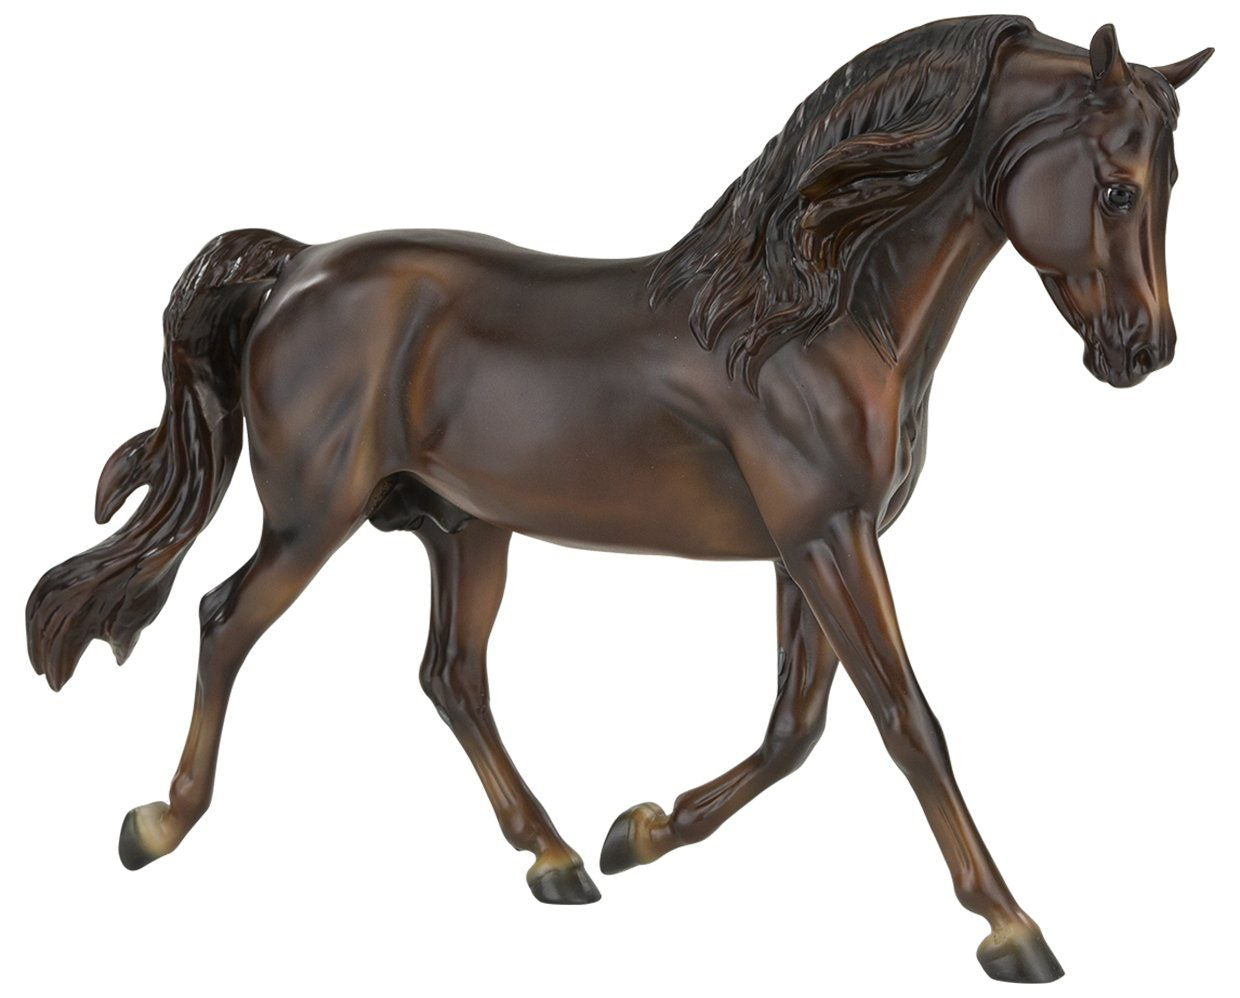 New Breyer Releases for 2022